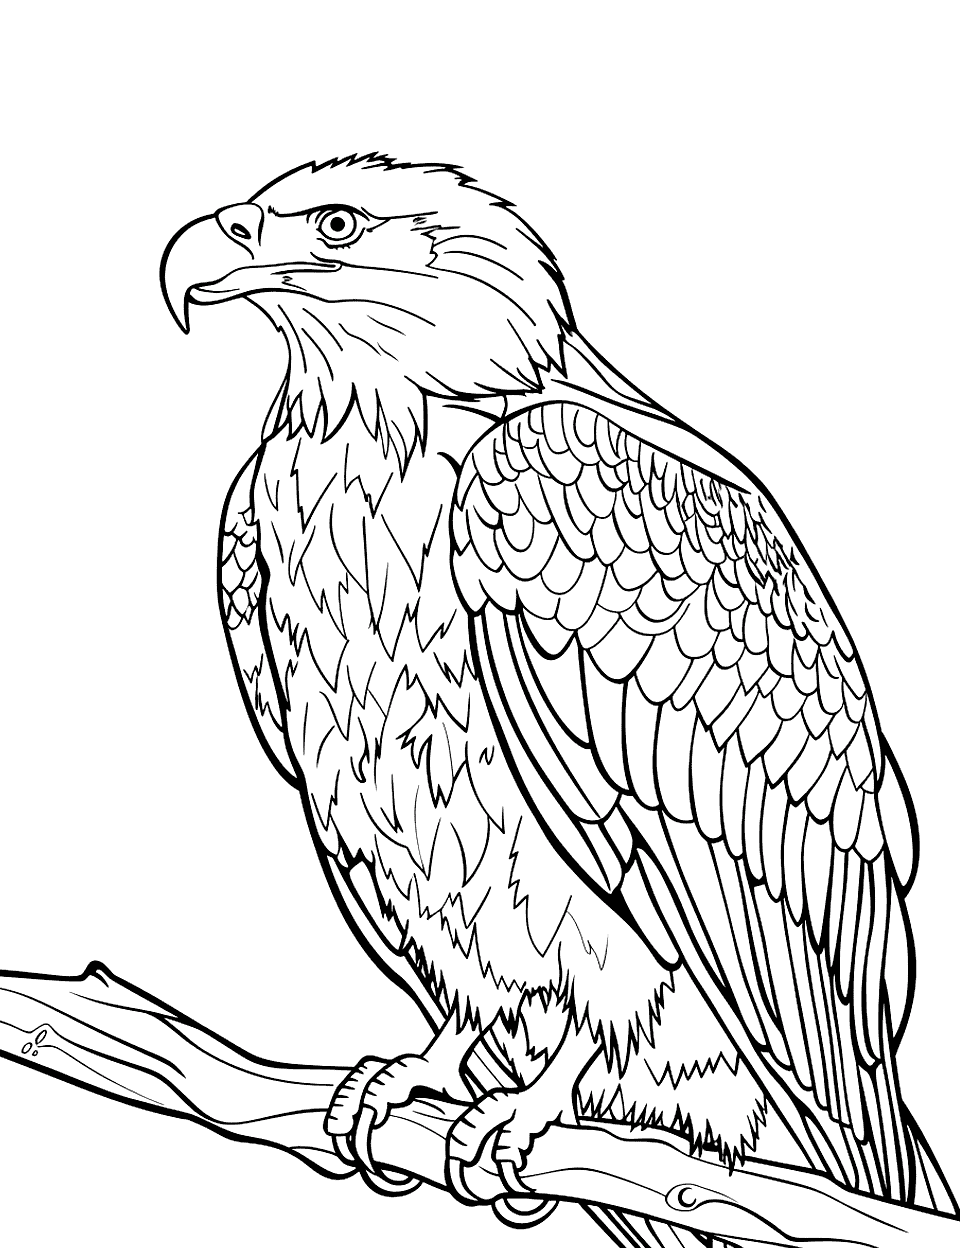 Proud American Eagle Perched Coloring Page - A stately American eagle sits on a branch, its sharp eyes looking out over a plain landscape.